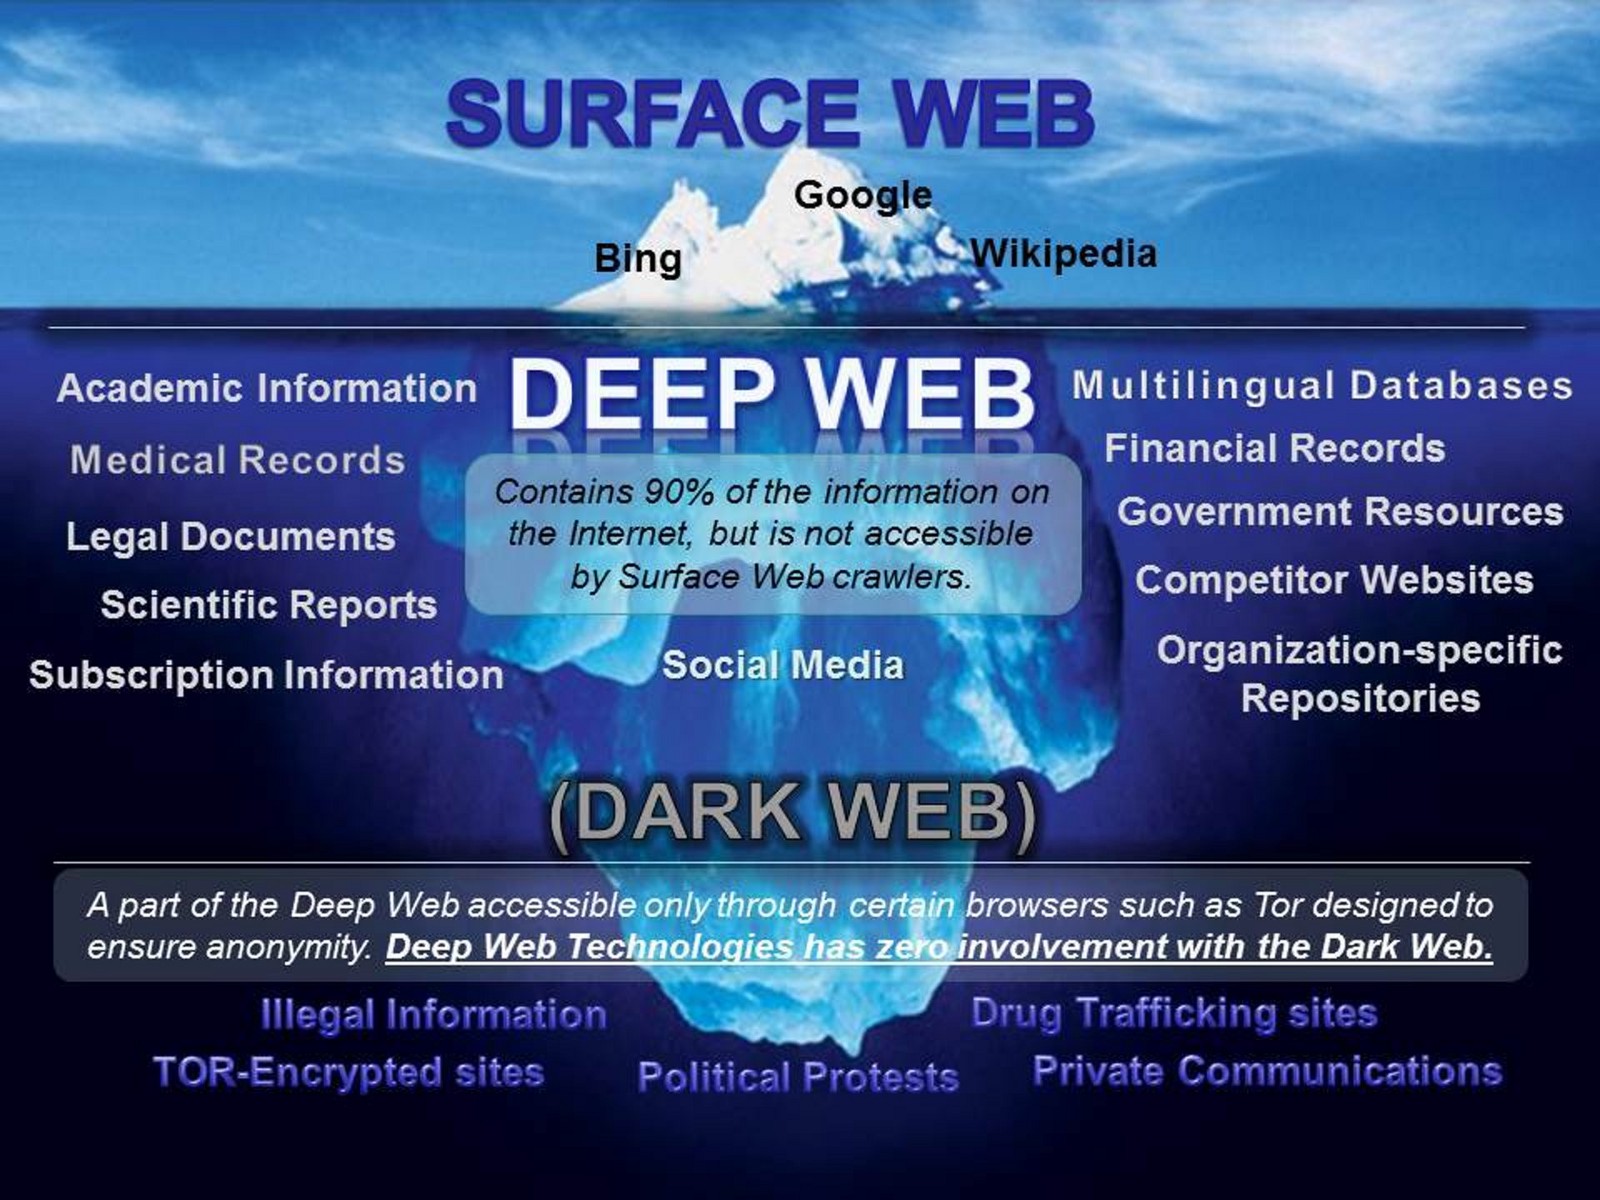 Discover the Secrets of the Dark Web: A Guide to Accessing the Deep Web